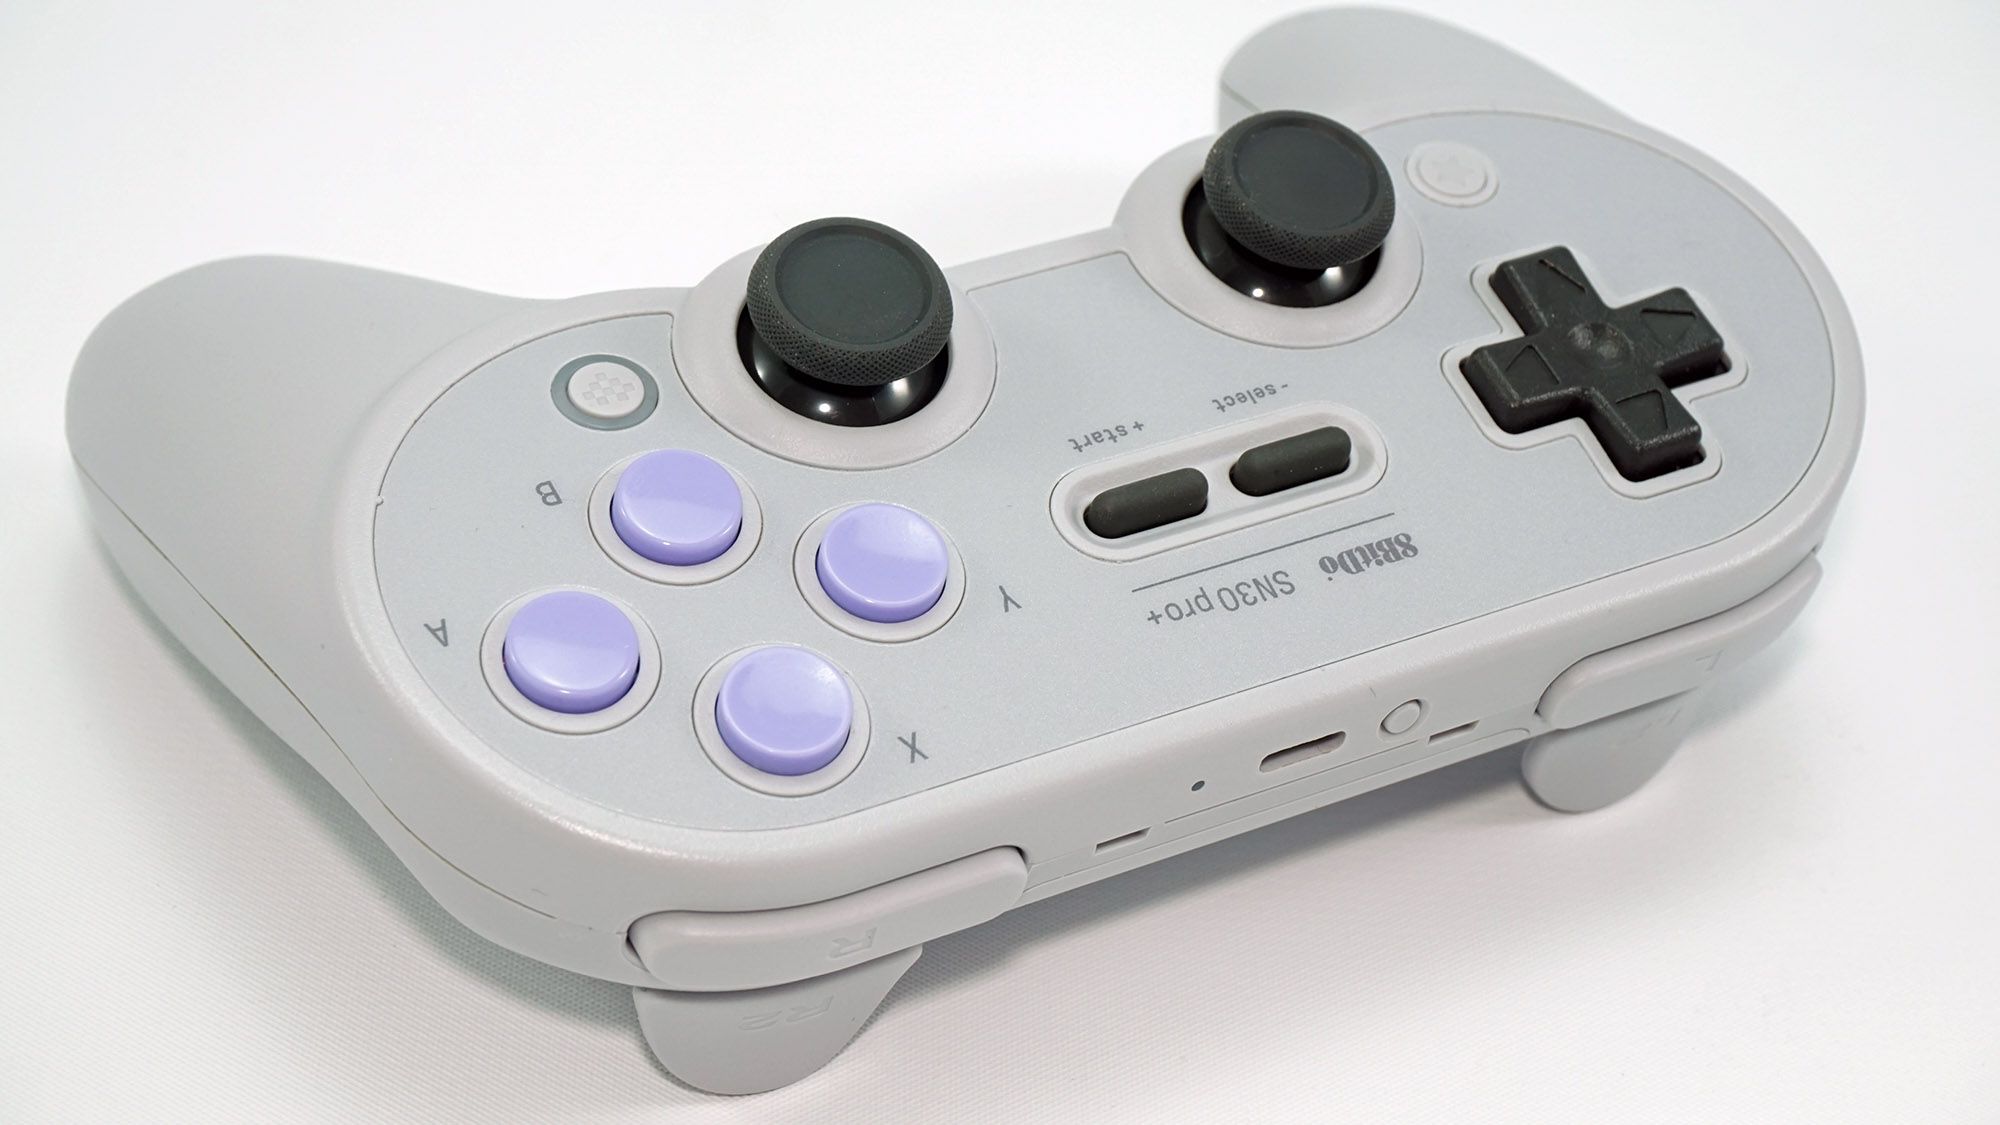 The SN30 Pro+ from the front, showing shoulder buttons.